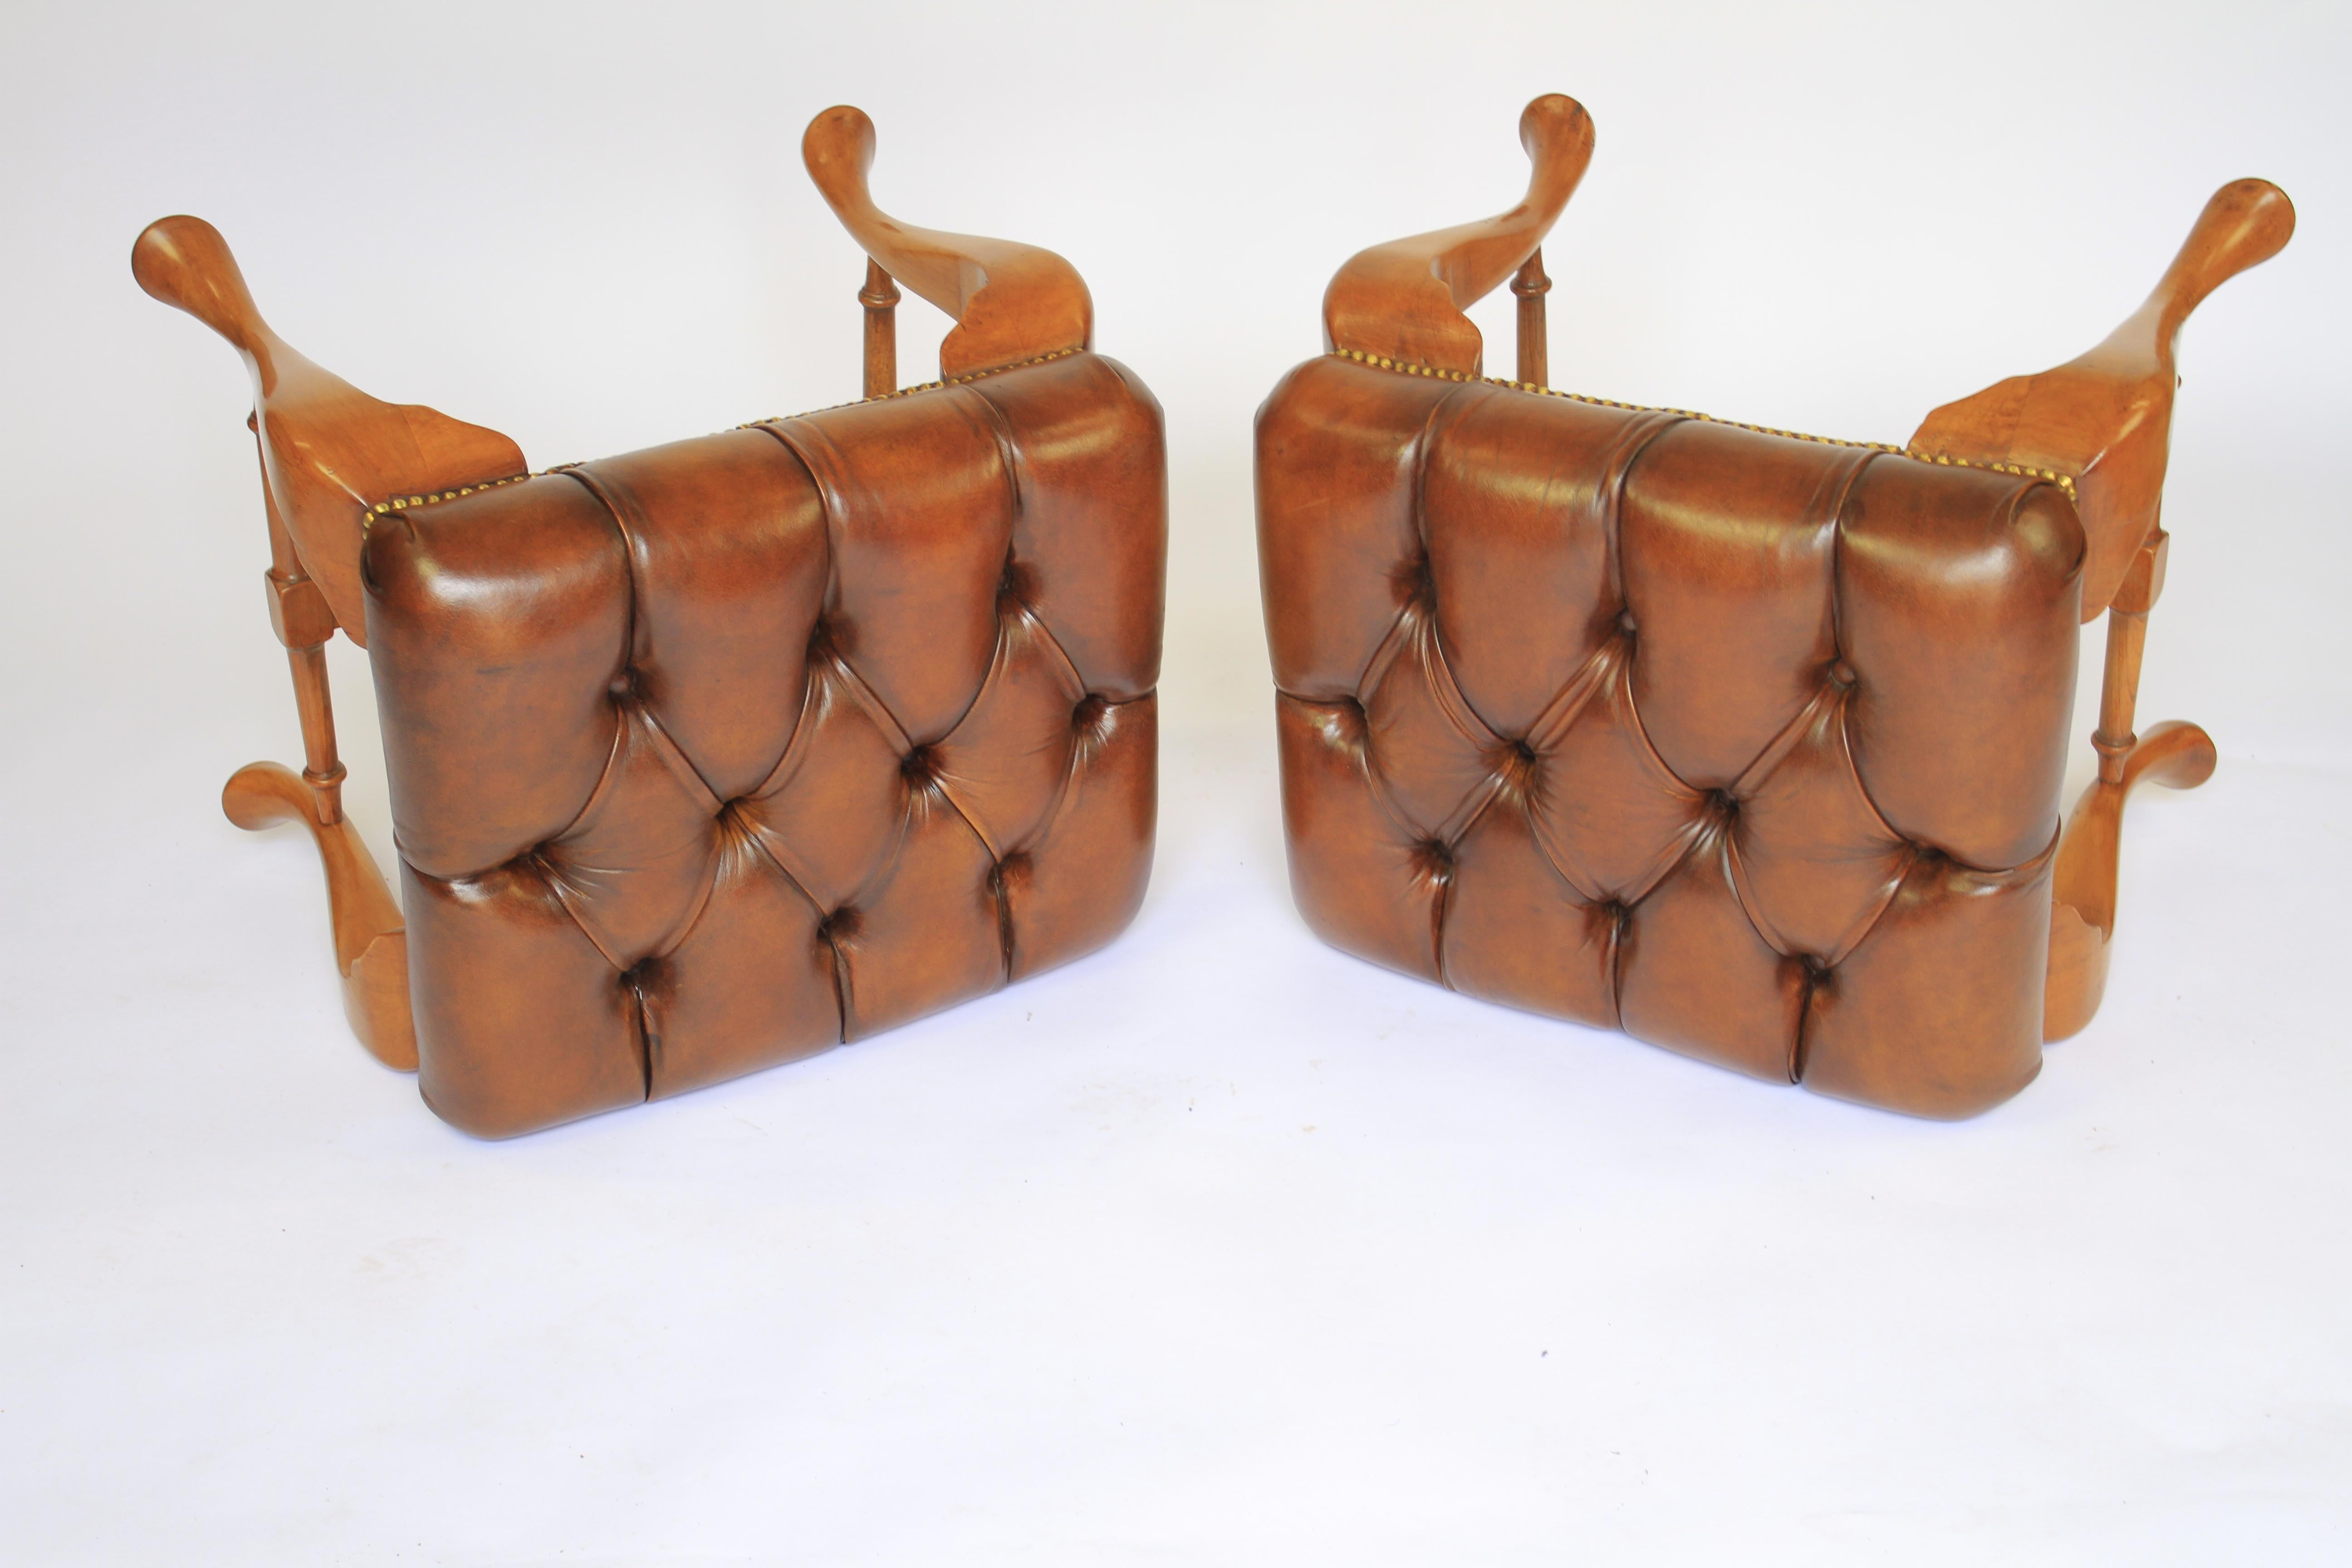 Pair Queen Anne Revival Walnut Foot Stools circa 1920s
Deep buttoned leather seats. recently 
covered in leather & coloured to chestnut
Walnut Cabriole shaped legs with turned H cross stretcher 
Good quality pair
Recently Polished